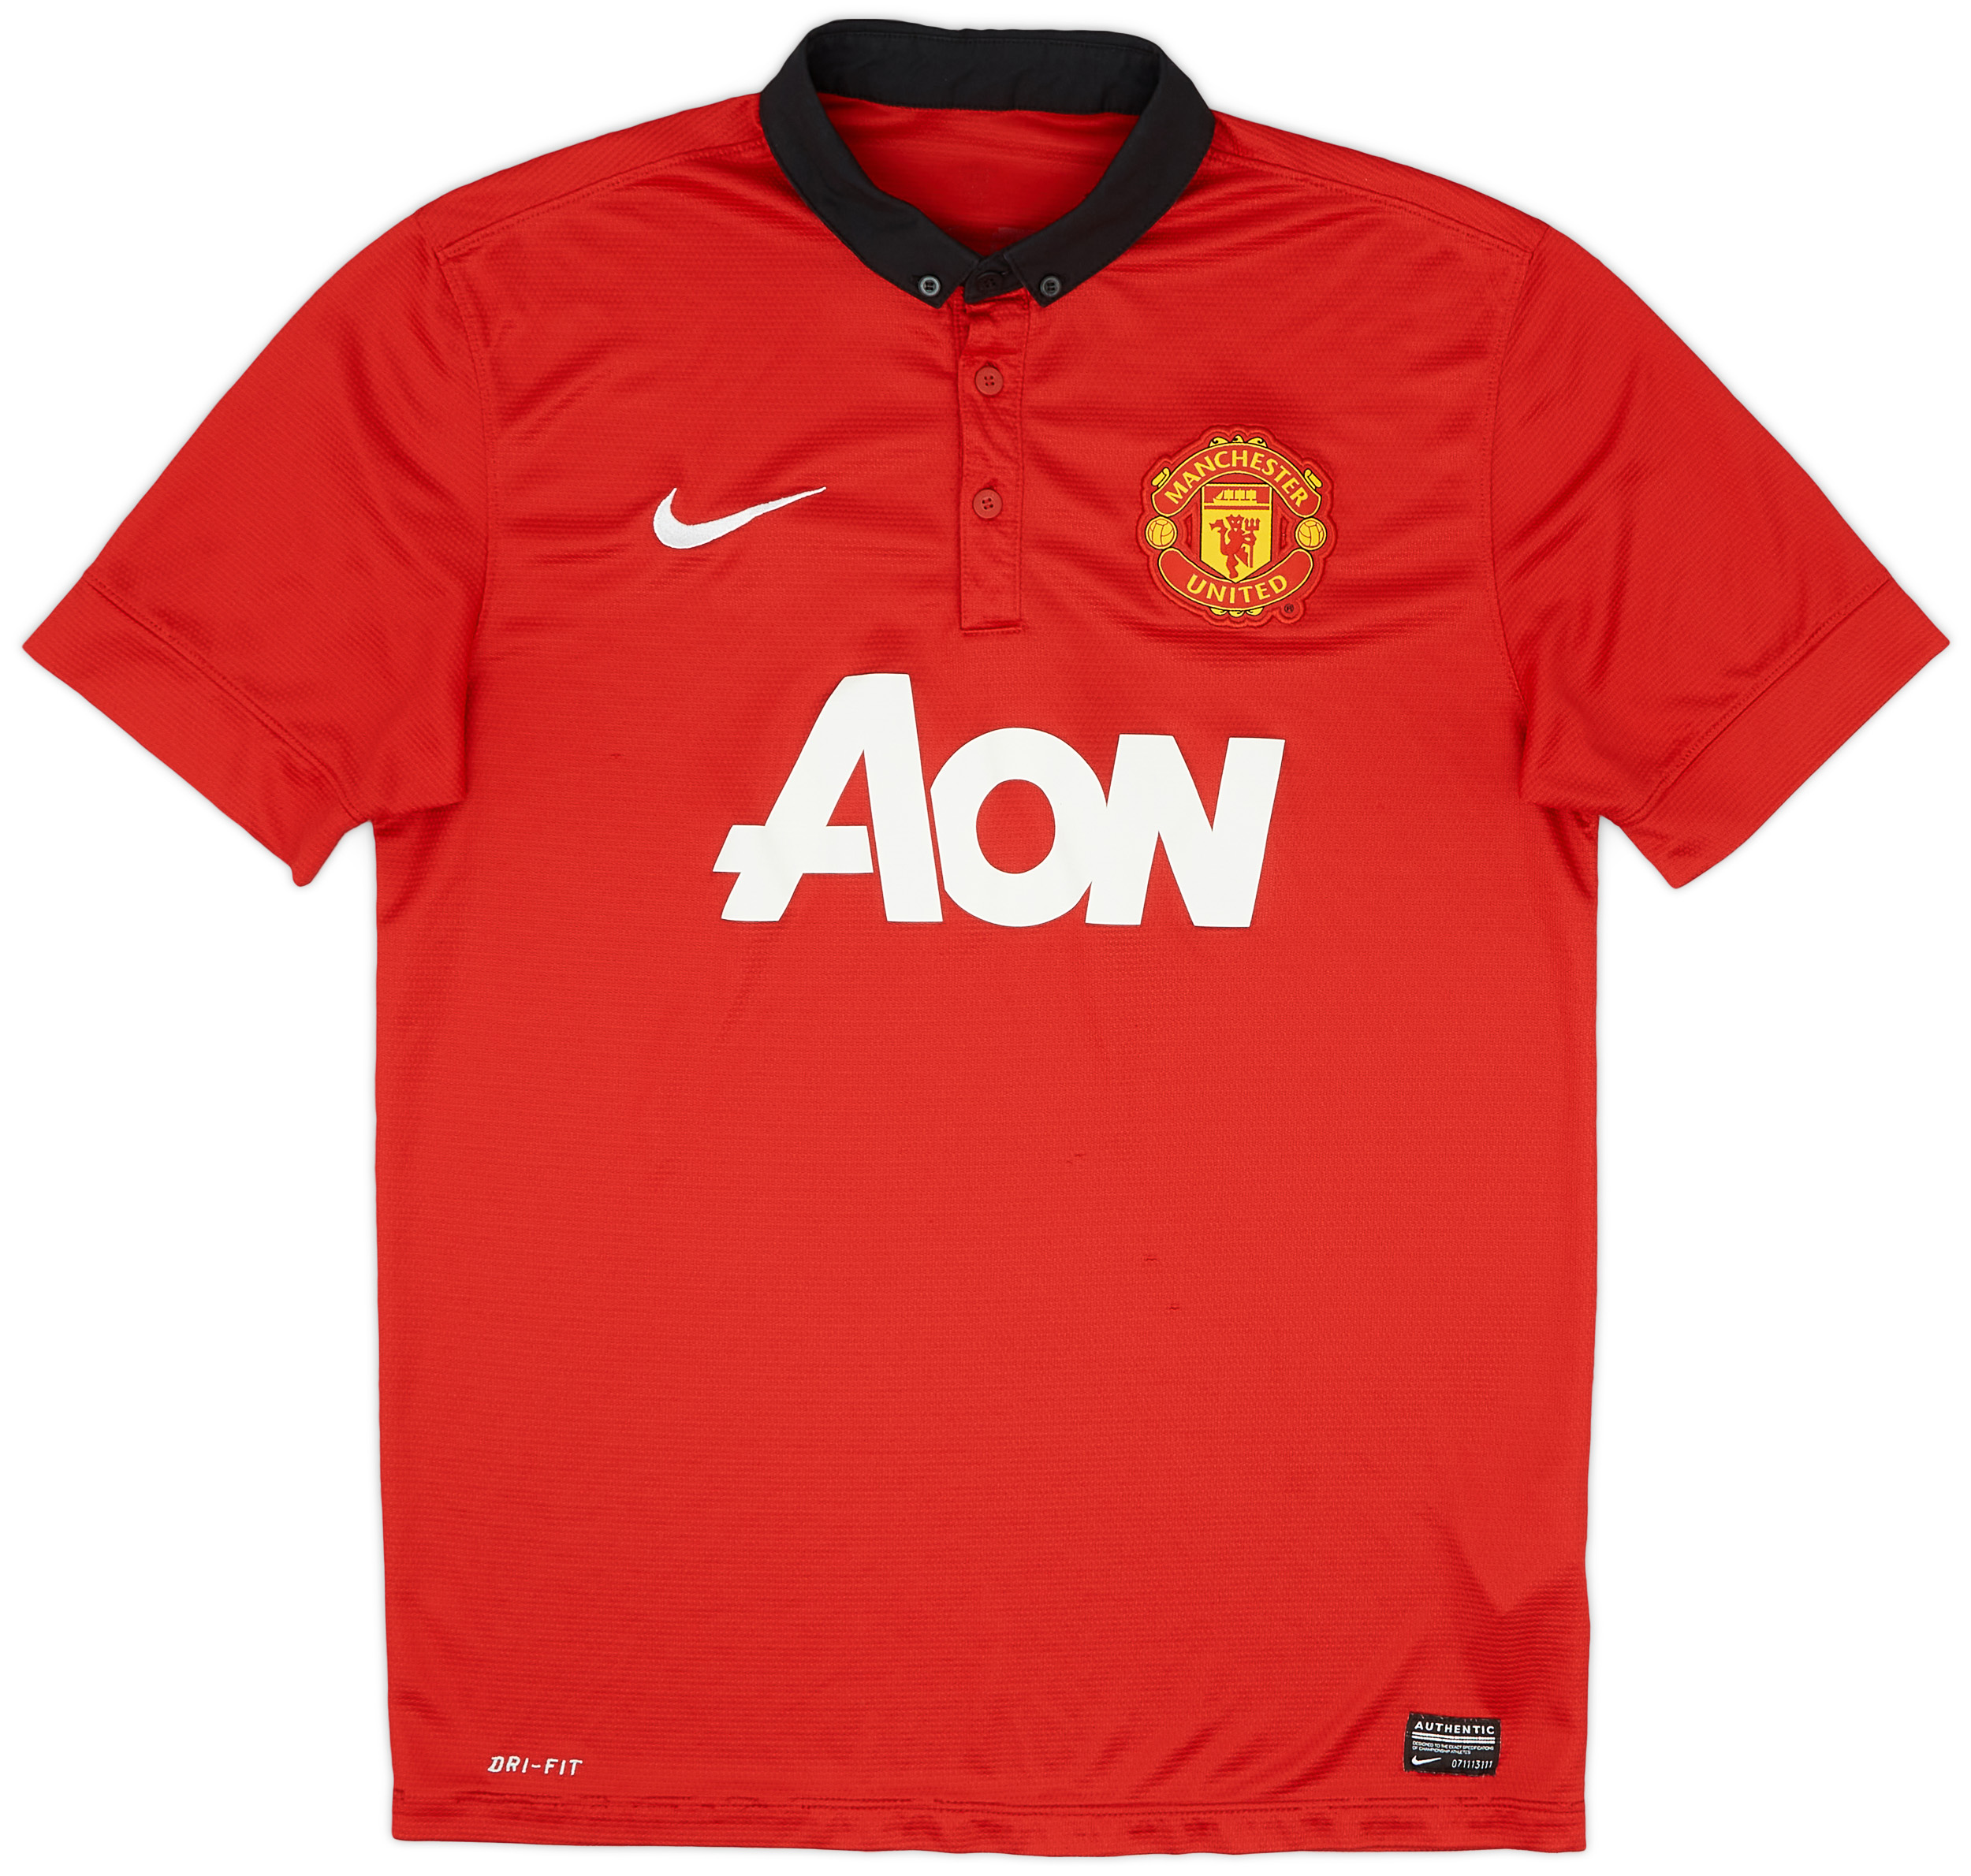 2013-14 Manchester United Home Shirt - 8/10 - ()